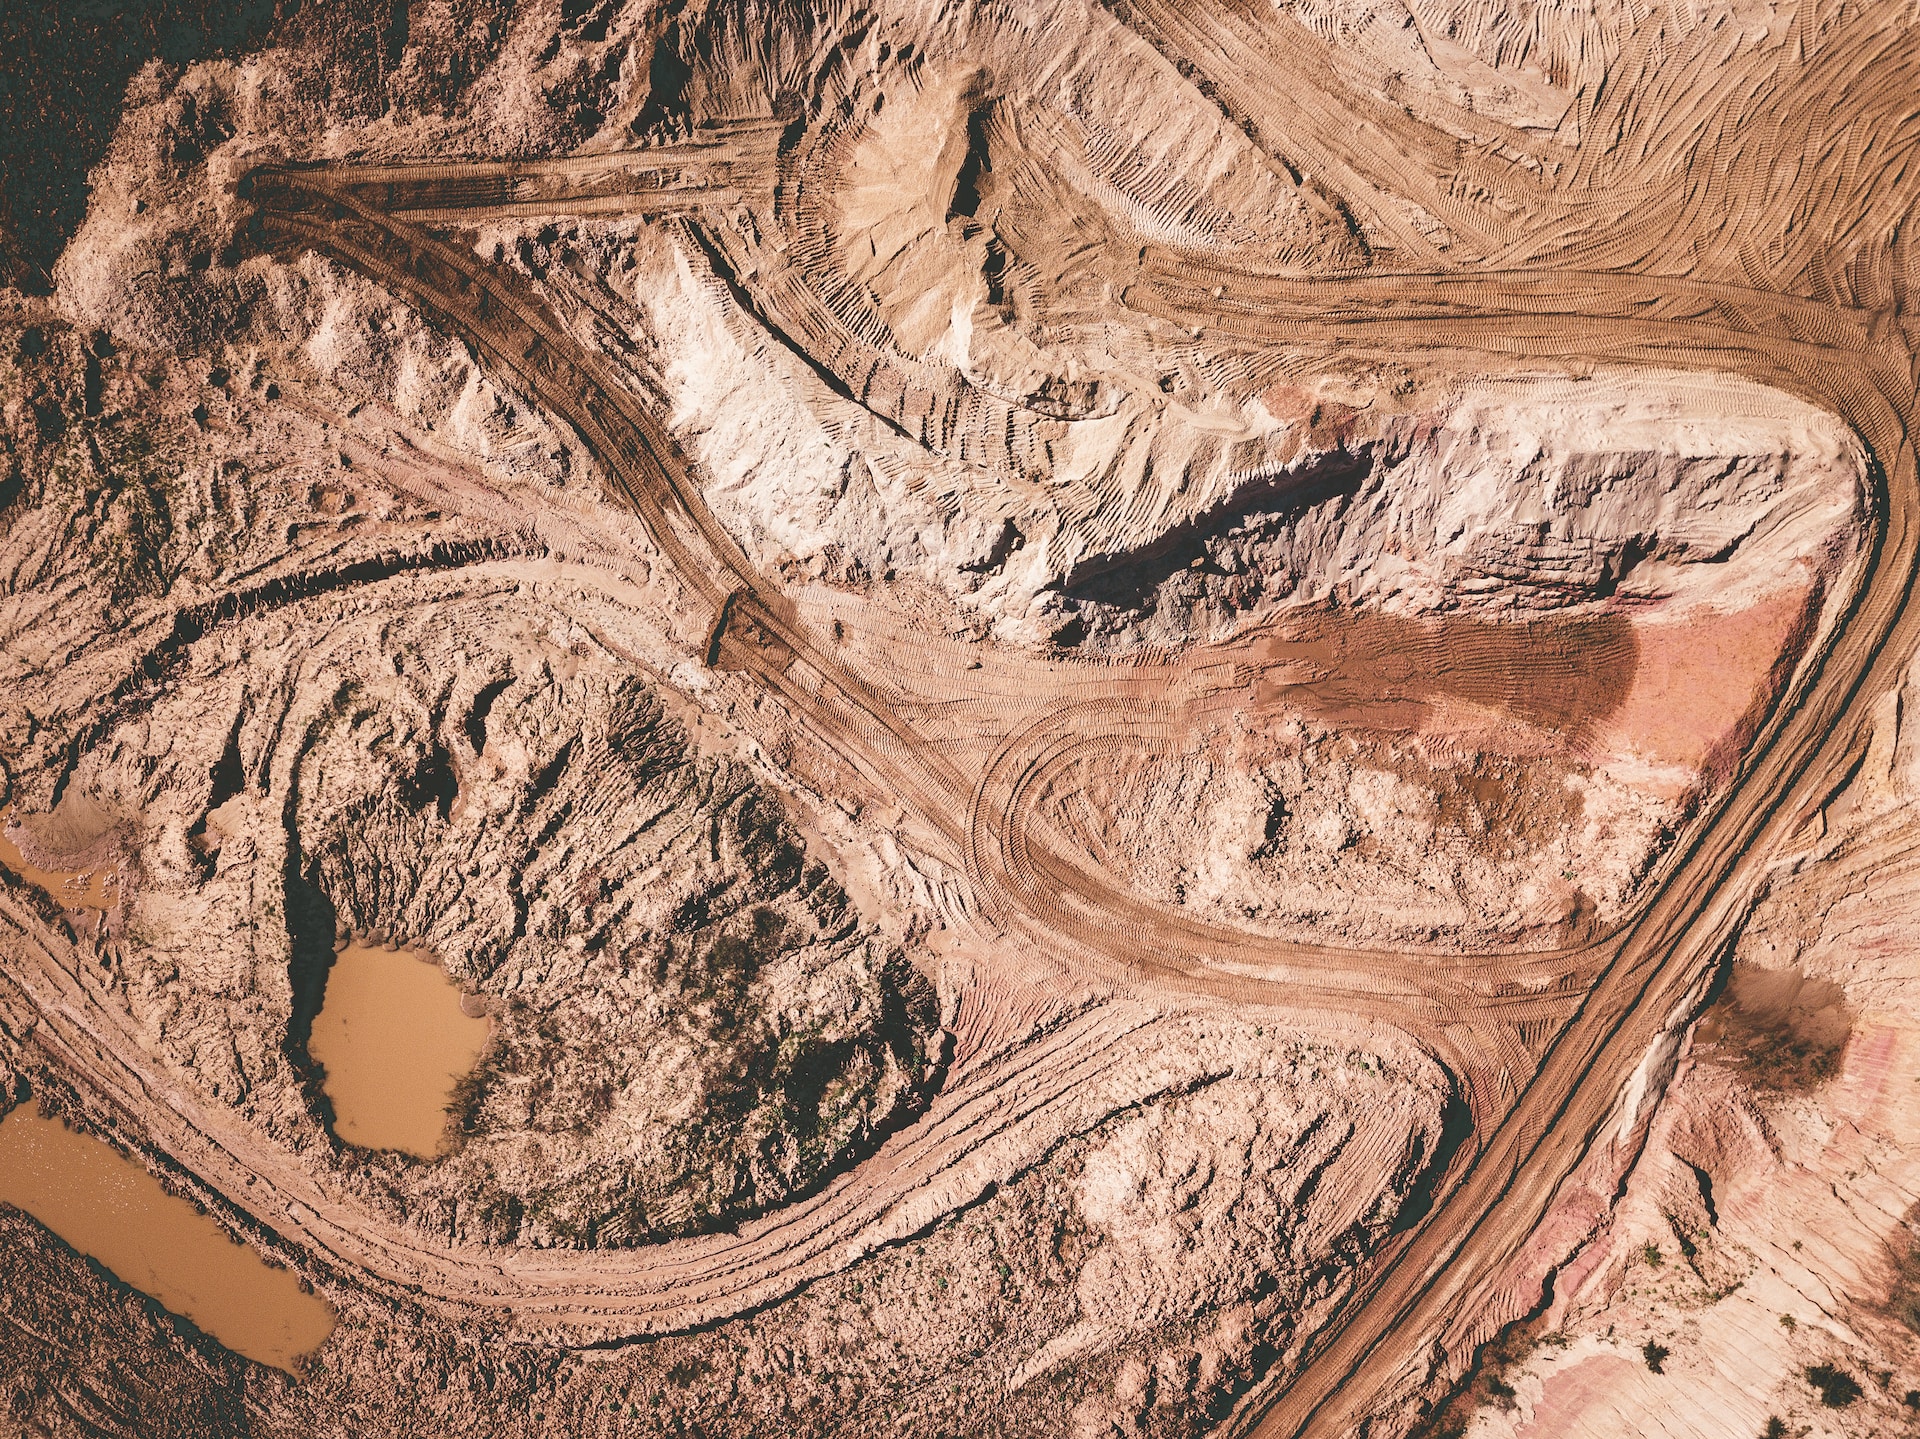 Codelco Languishes Under New Taxes and Falling Output, Complicating South American Copper Growth